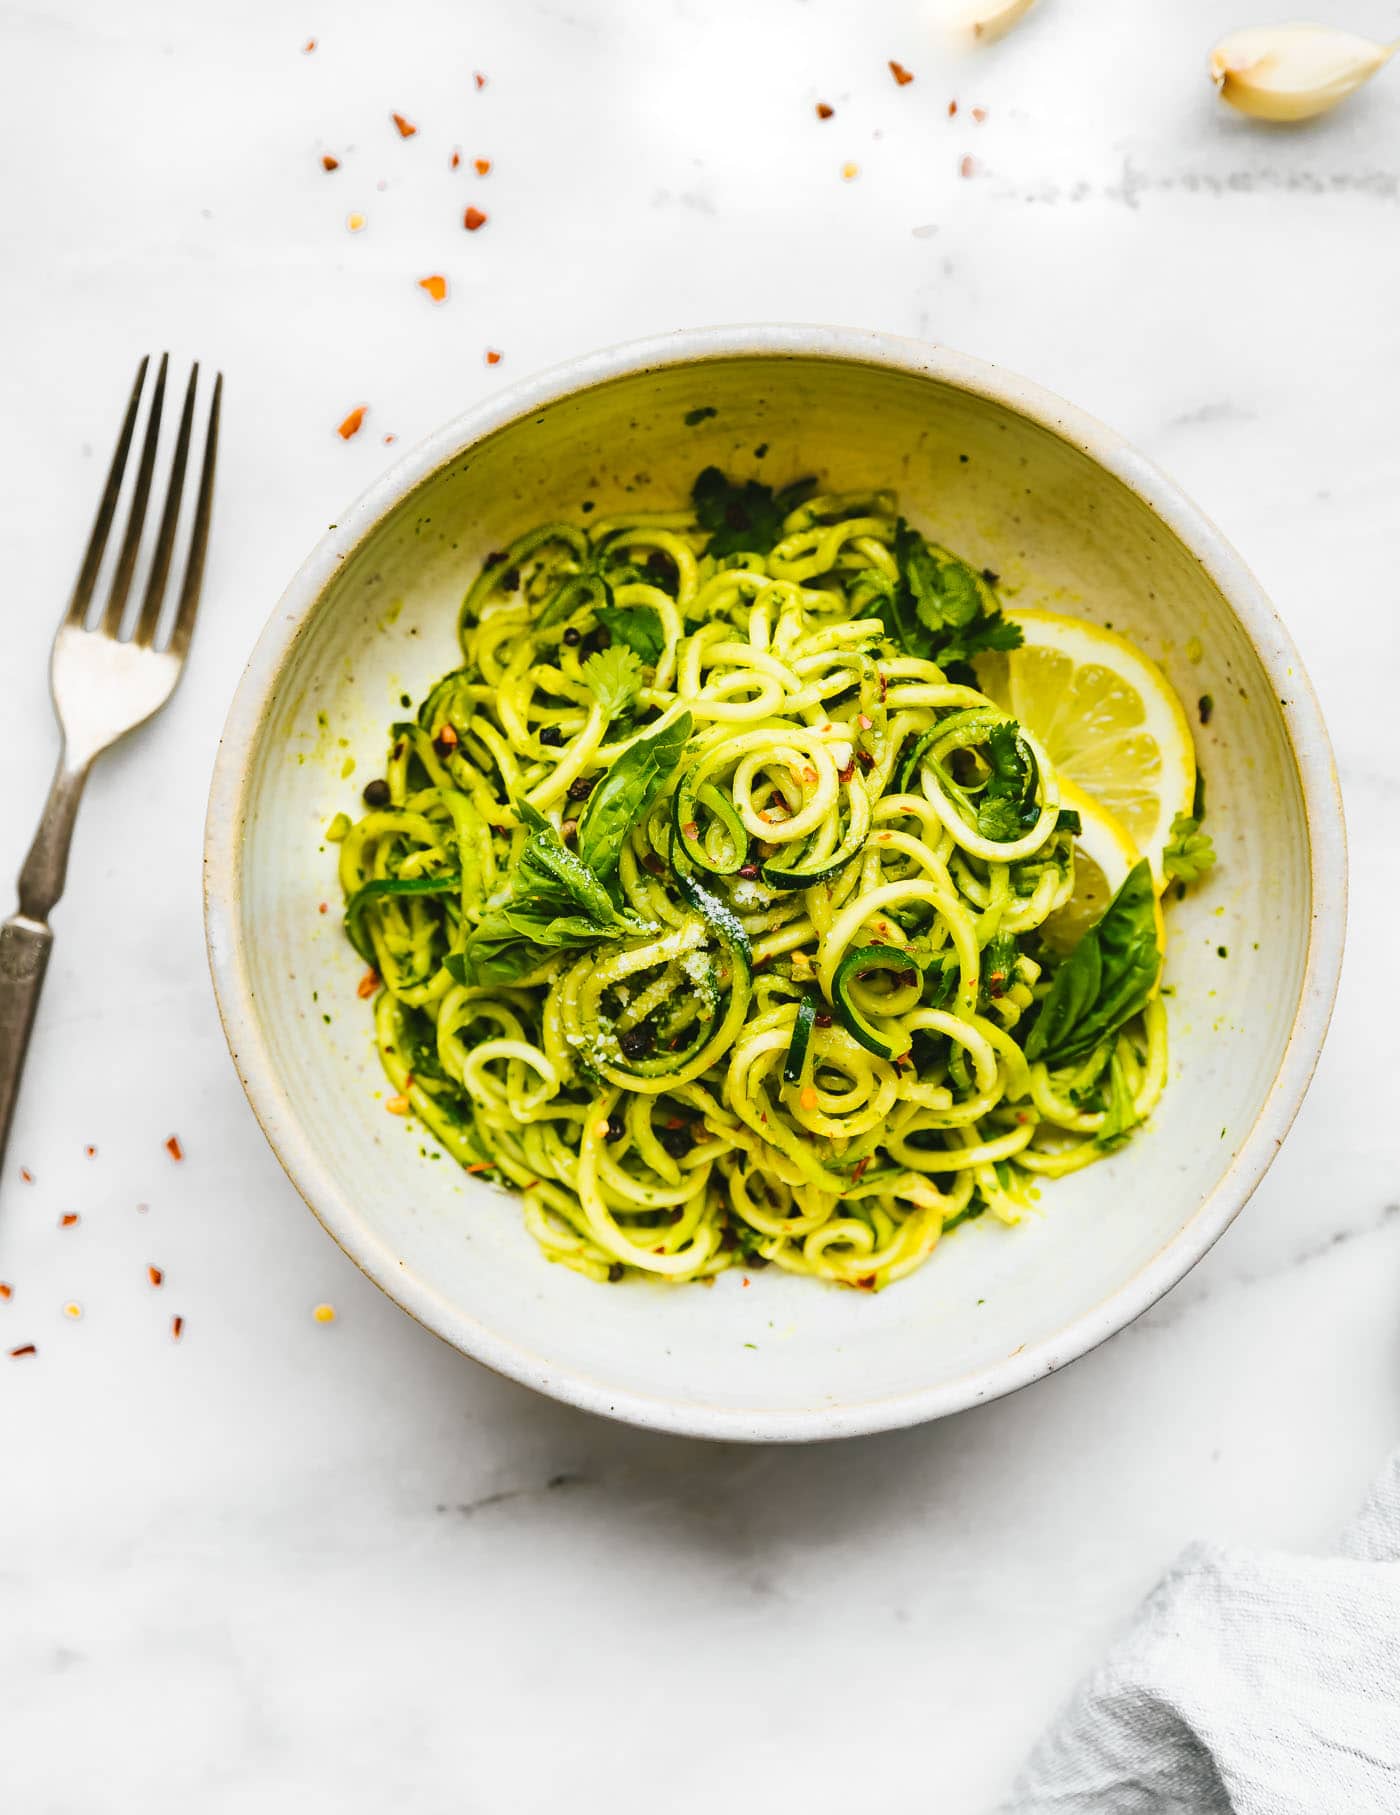 Overhead view zucchini noodle pasta with spicy pesto sauce in stone bowl.